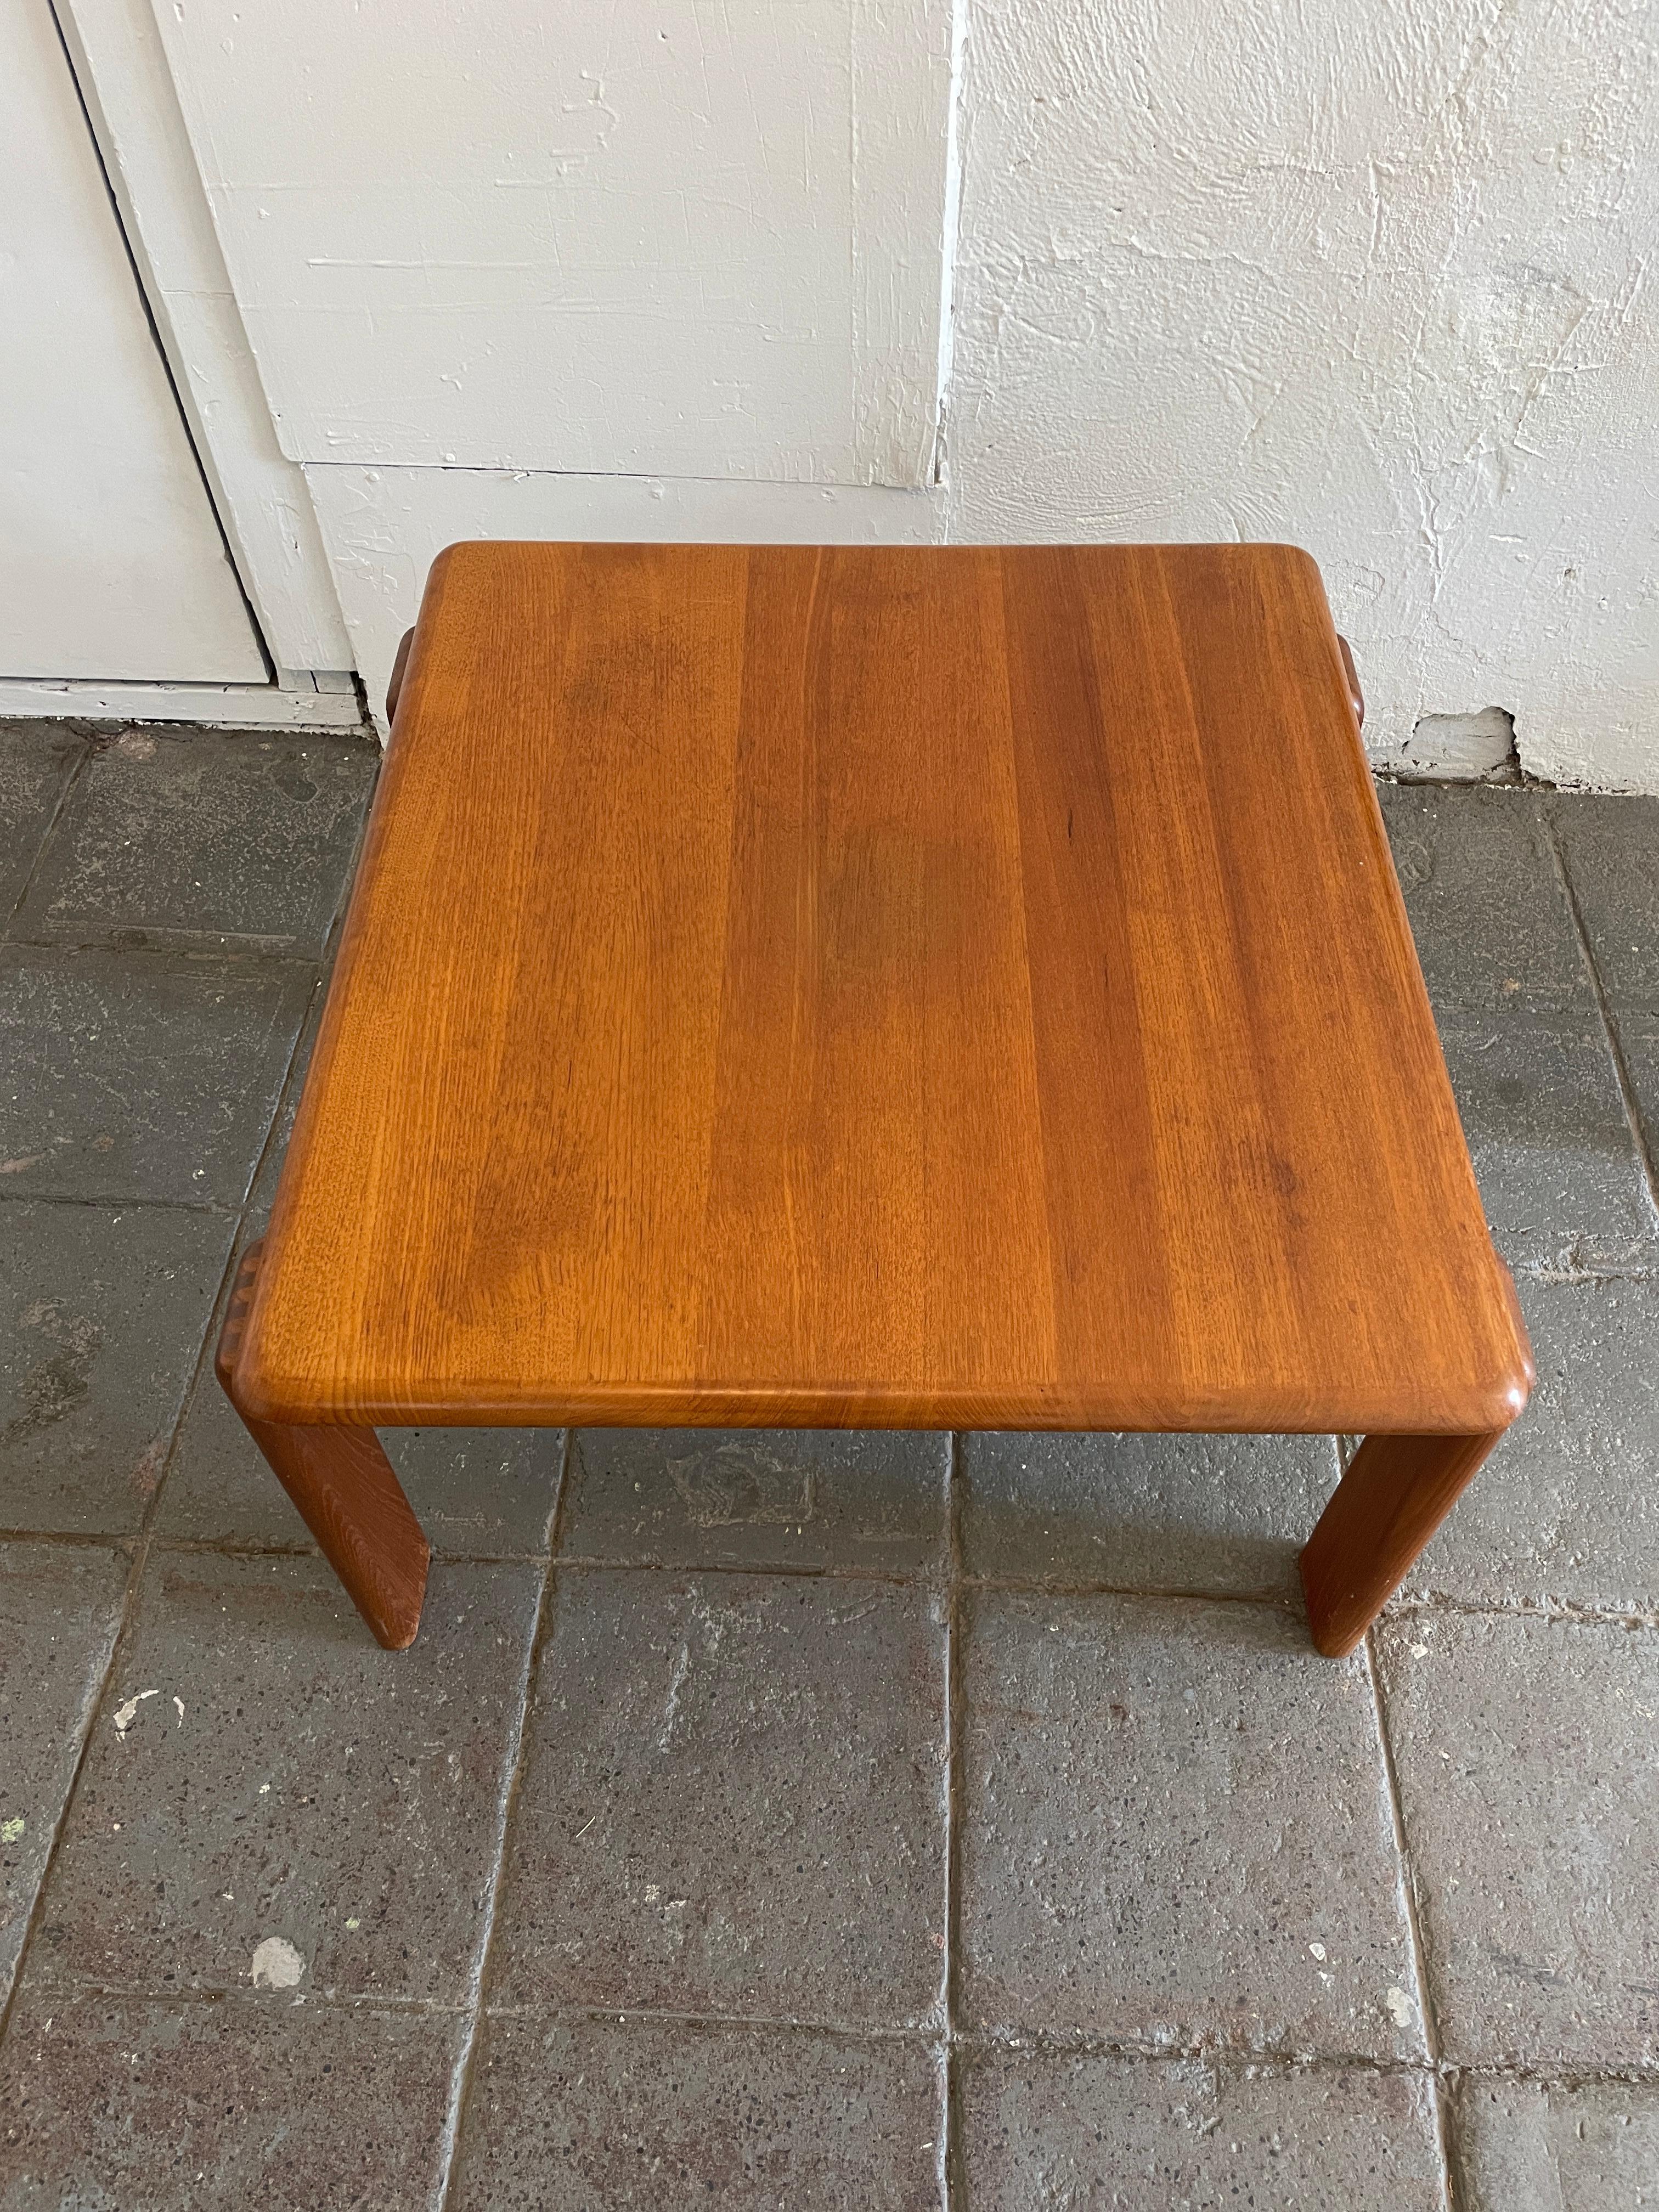 Beautiful Solid teak side table table. Amazing jointery on legs very sturdy and great design. 
Located in Brooklyn NYC. No Labels or MFG marks.

Style of Hvidt & Mølgaard

Measures
19.50